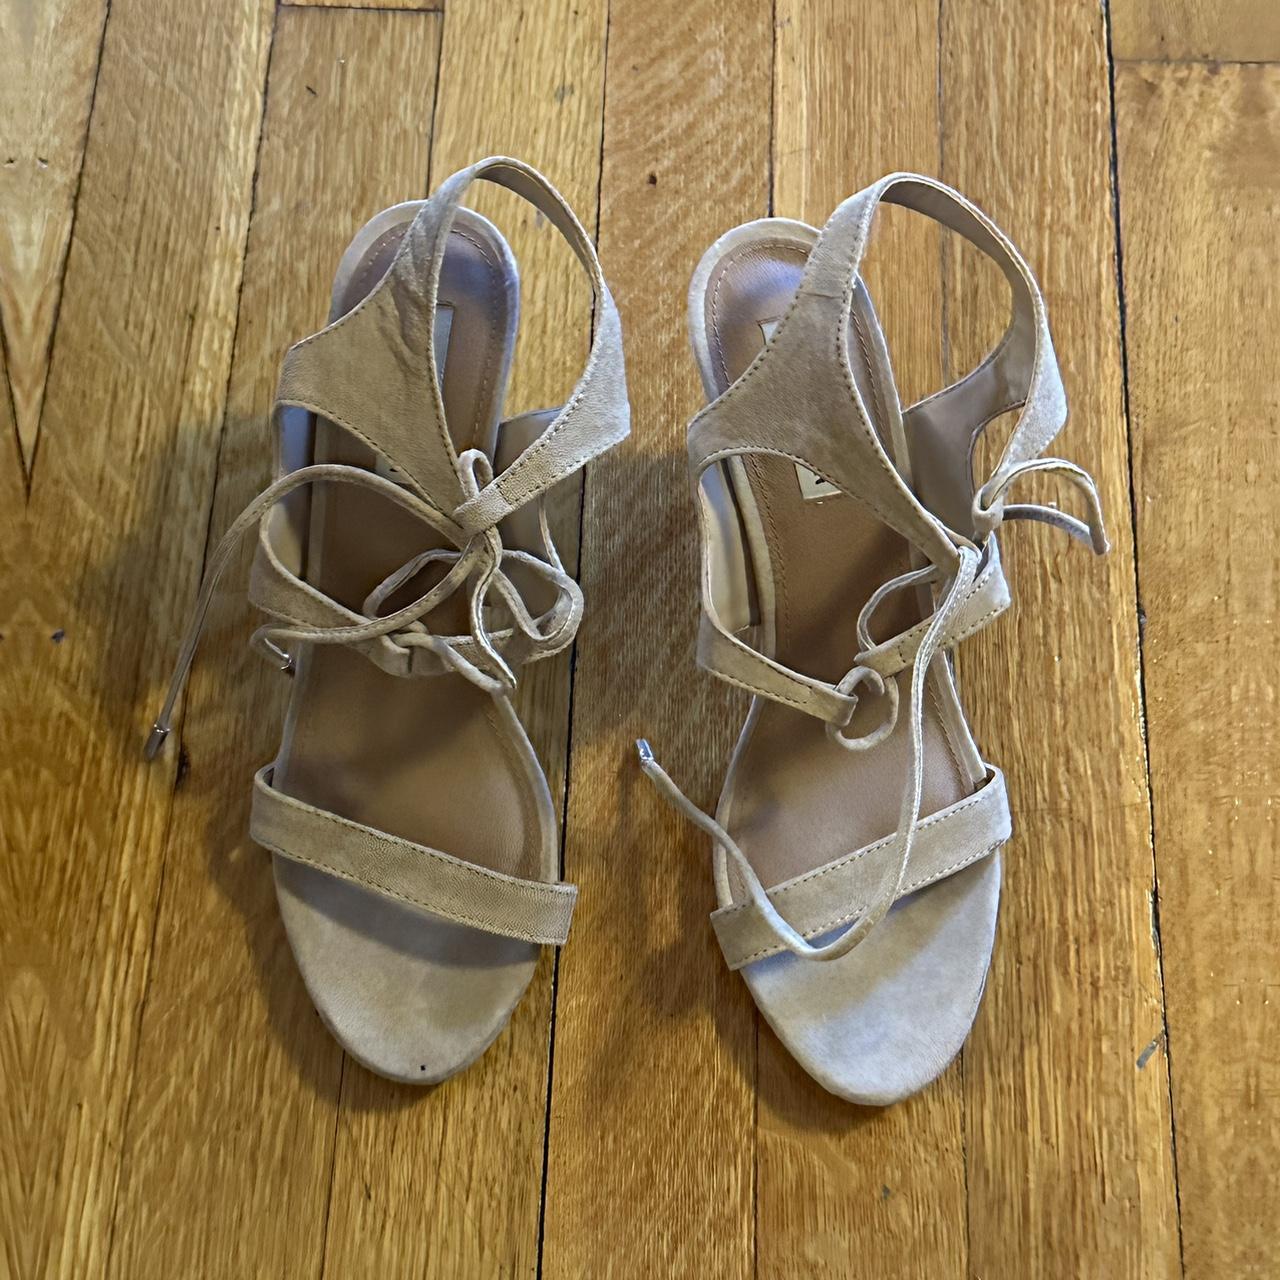 Nude Steve Madden lace up heels! Good condition but... - Depop